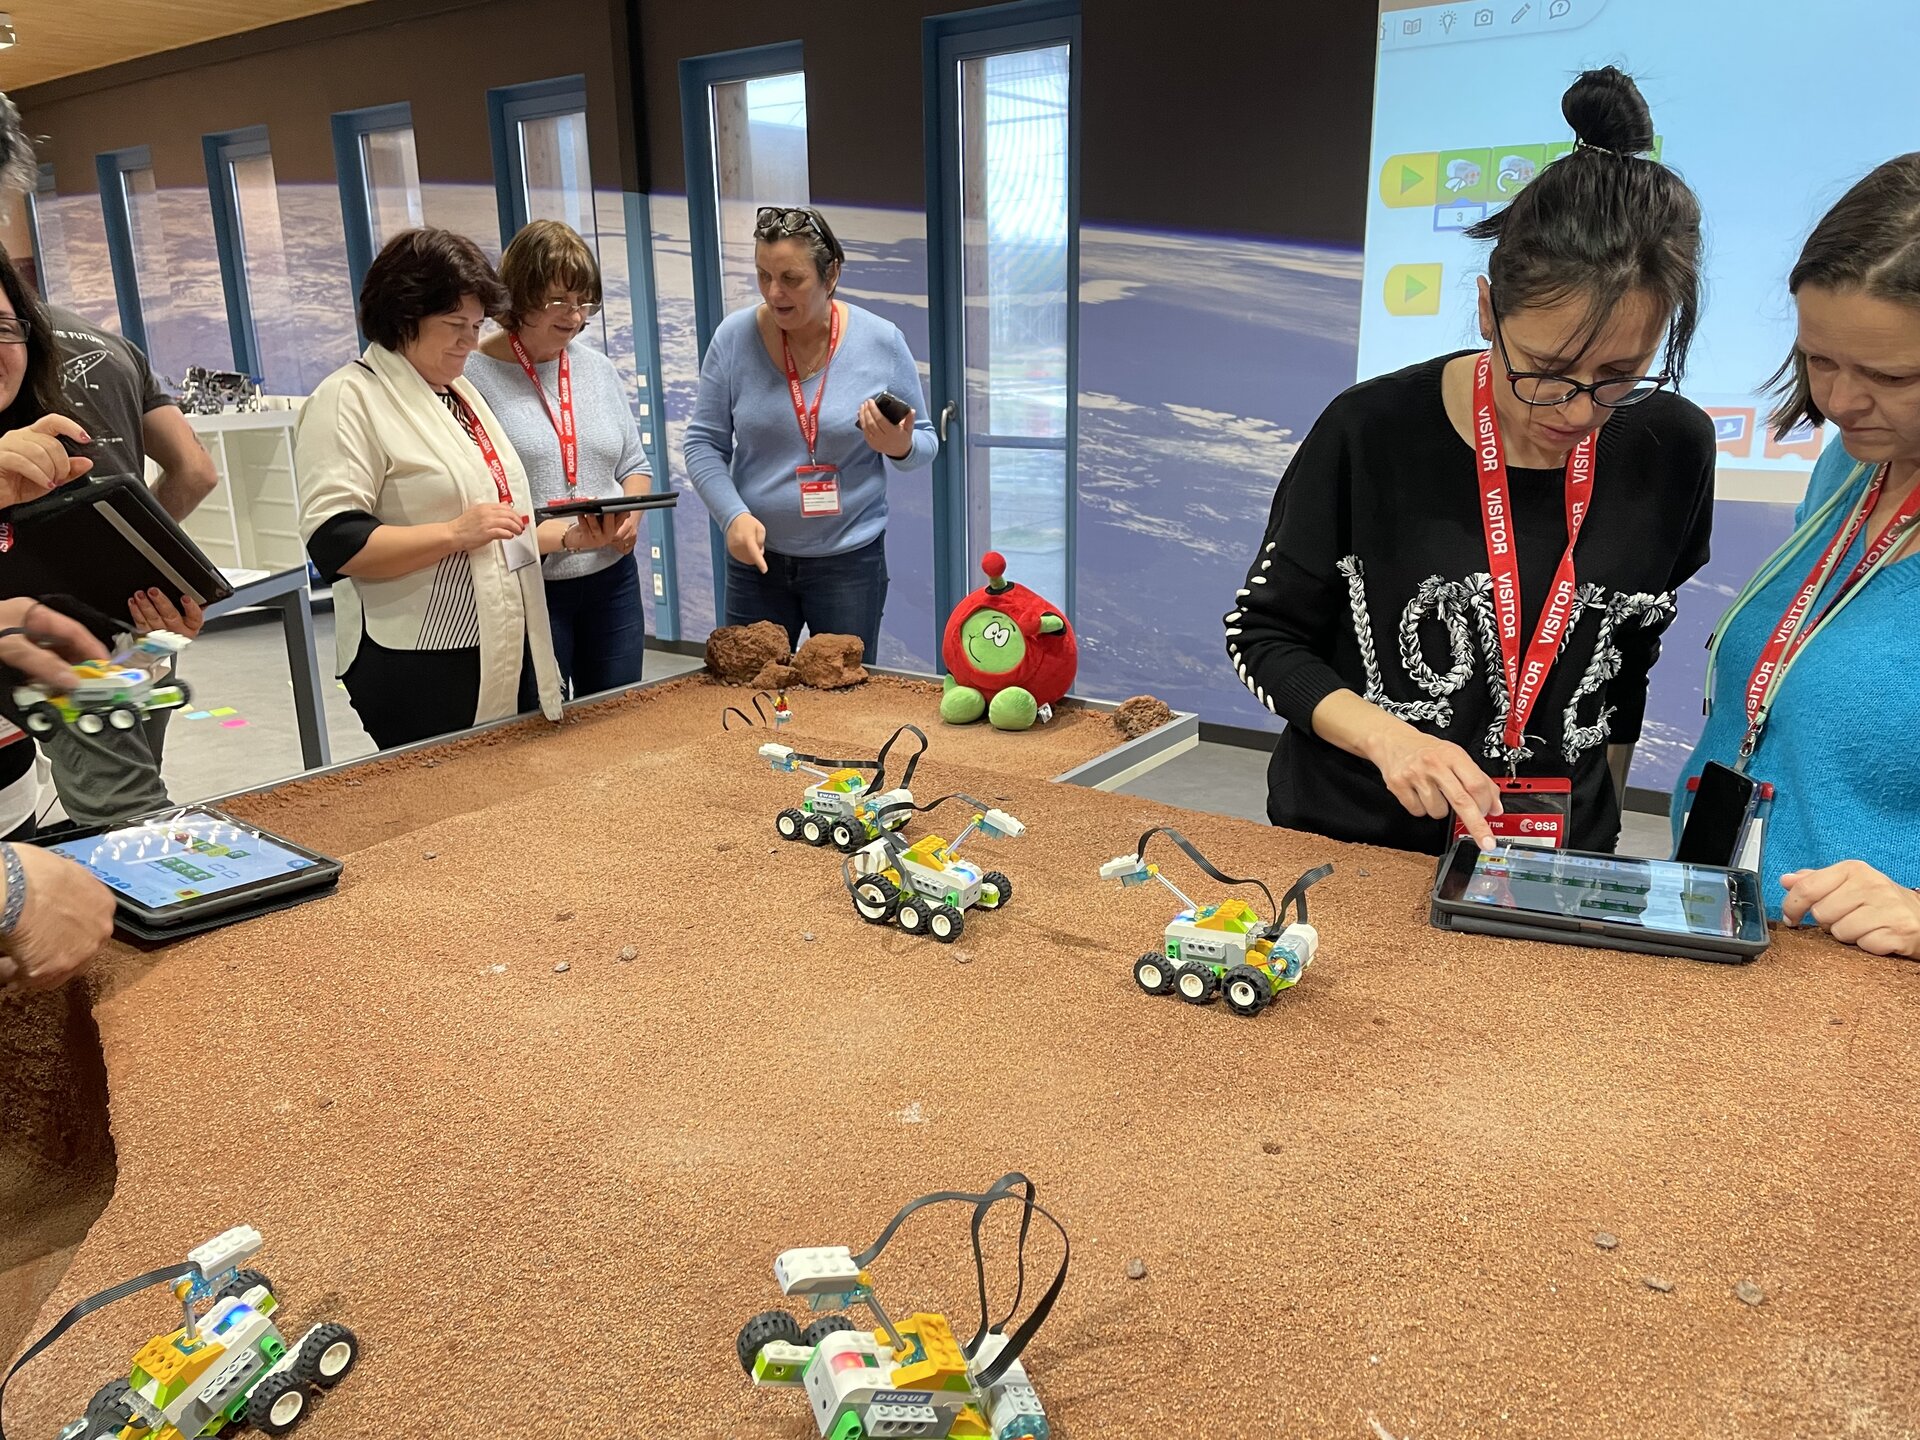 Exploring the surface of Mars, during the Robotics, Technology and Automation workshop.